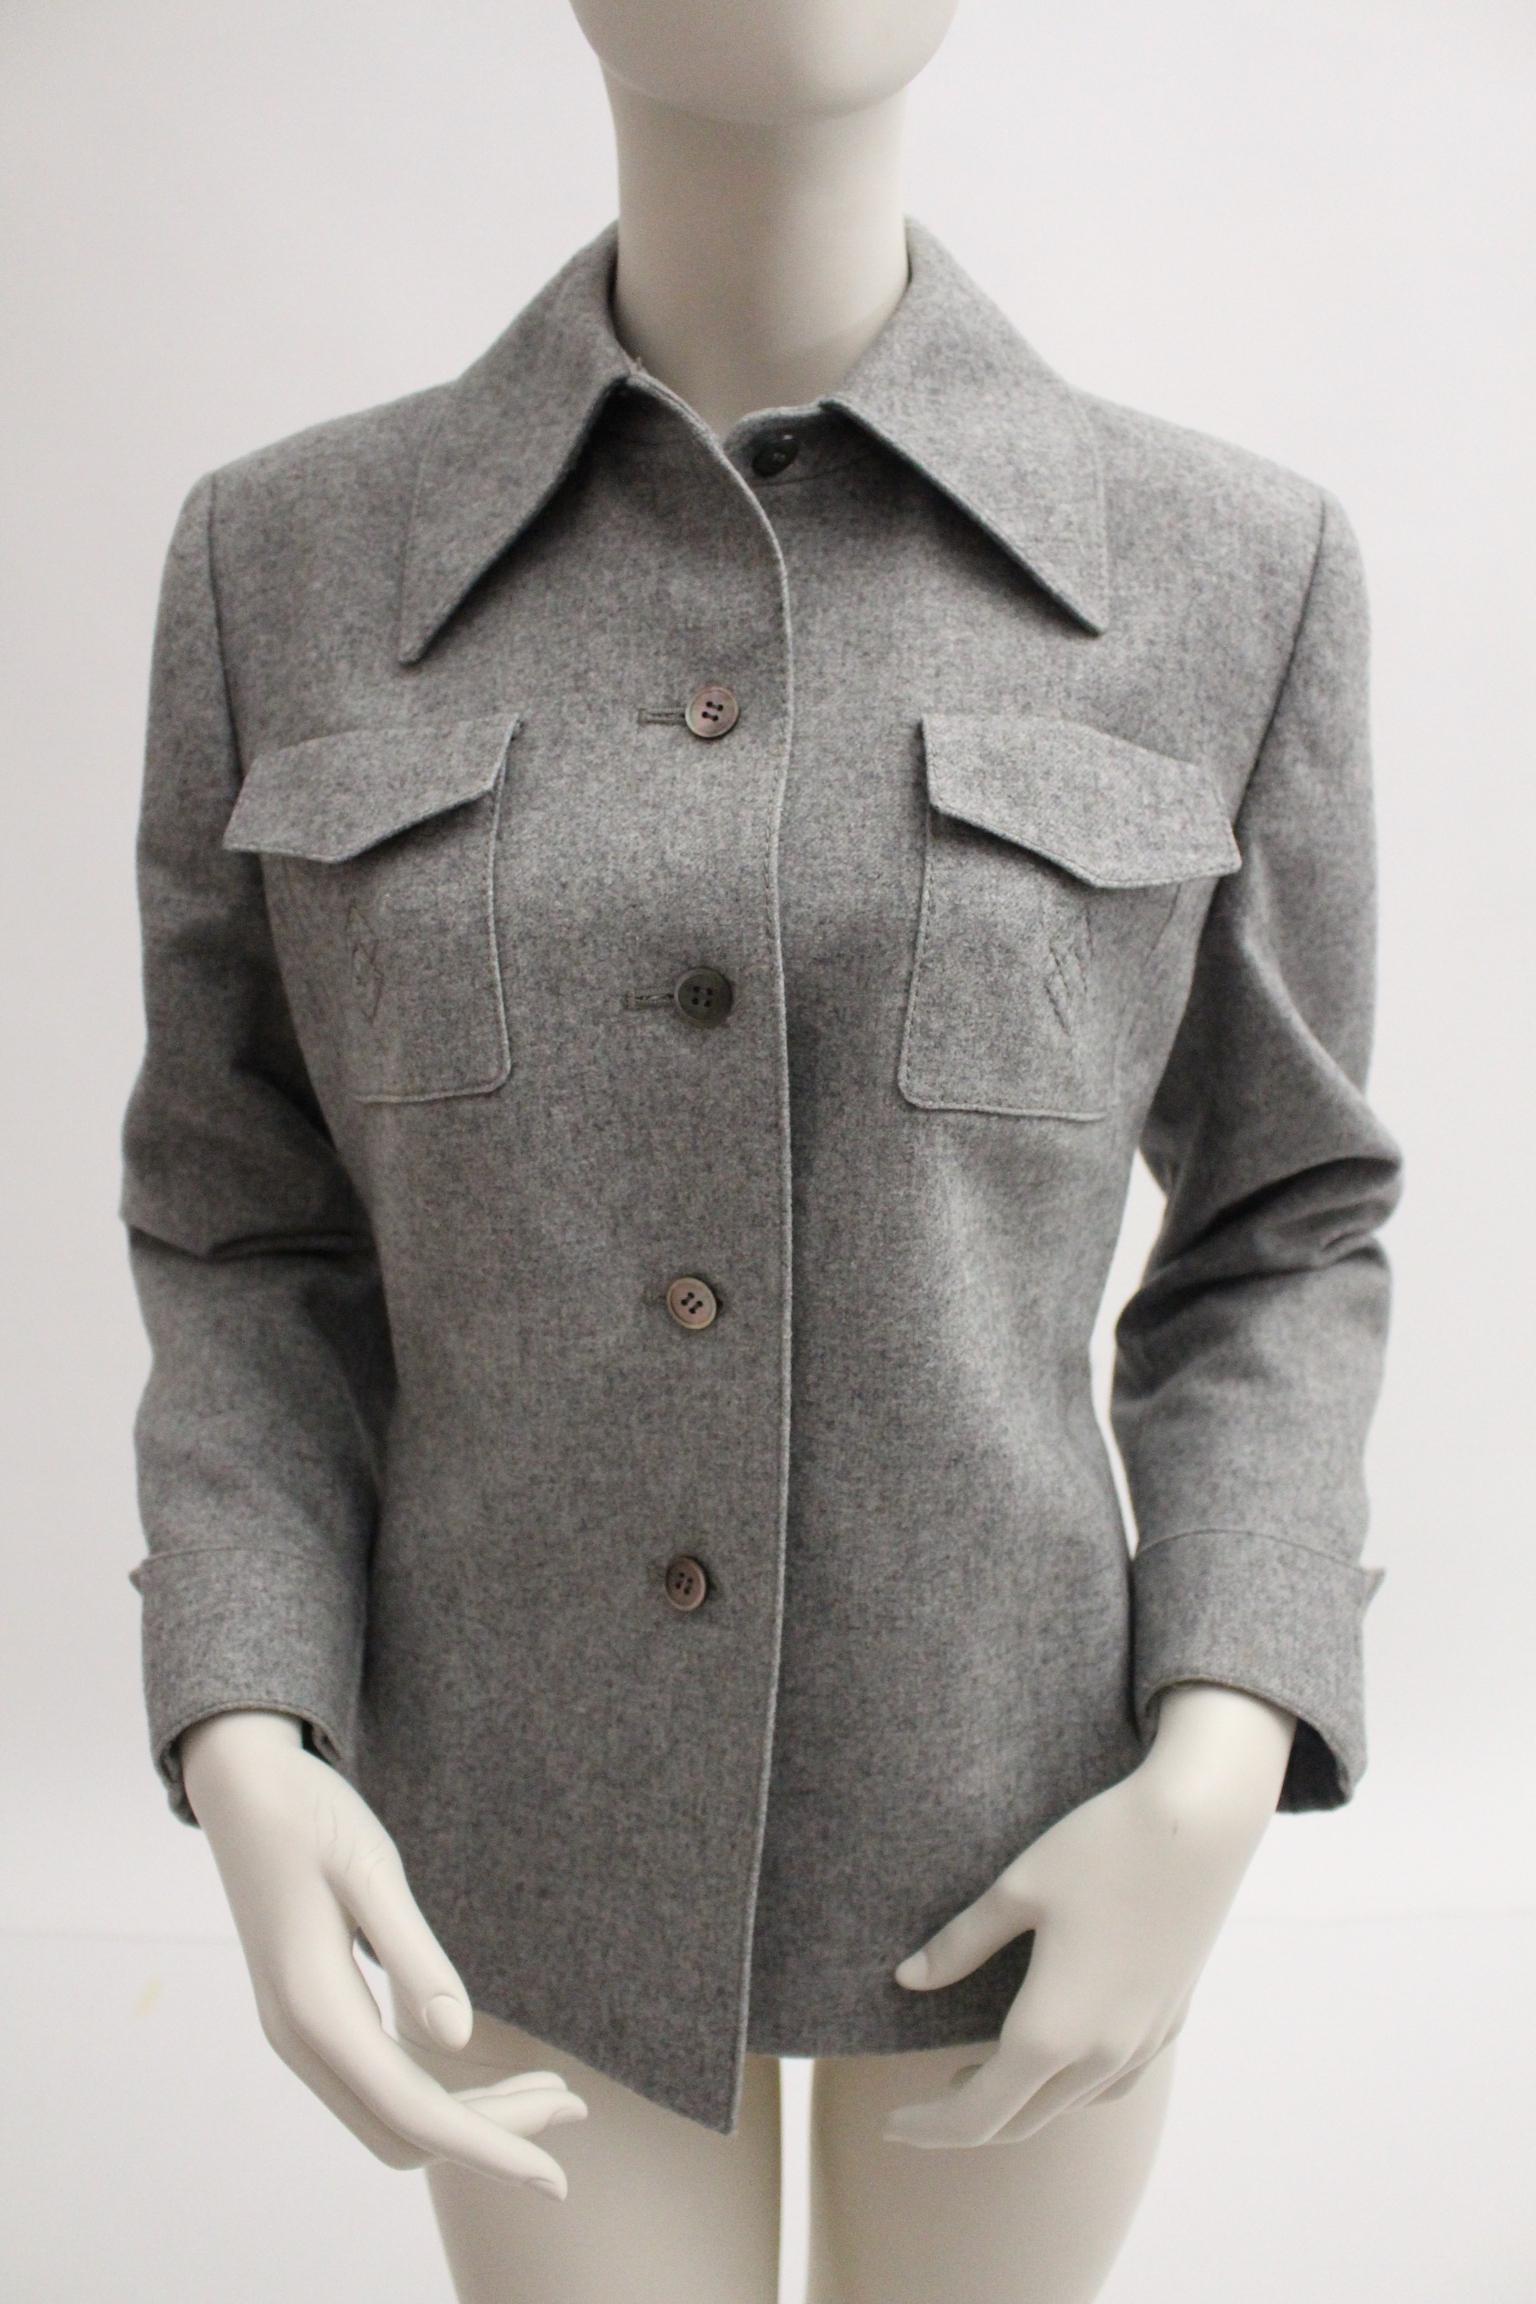 Grey Single-Breasted Wool Vintage Jacket by Herbert Schill 1960s Vienna For Sale 4